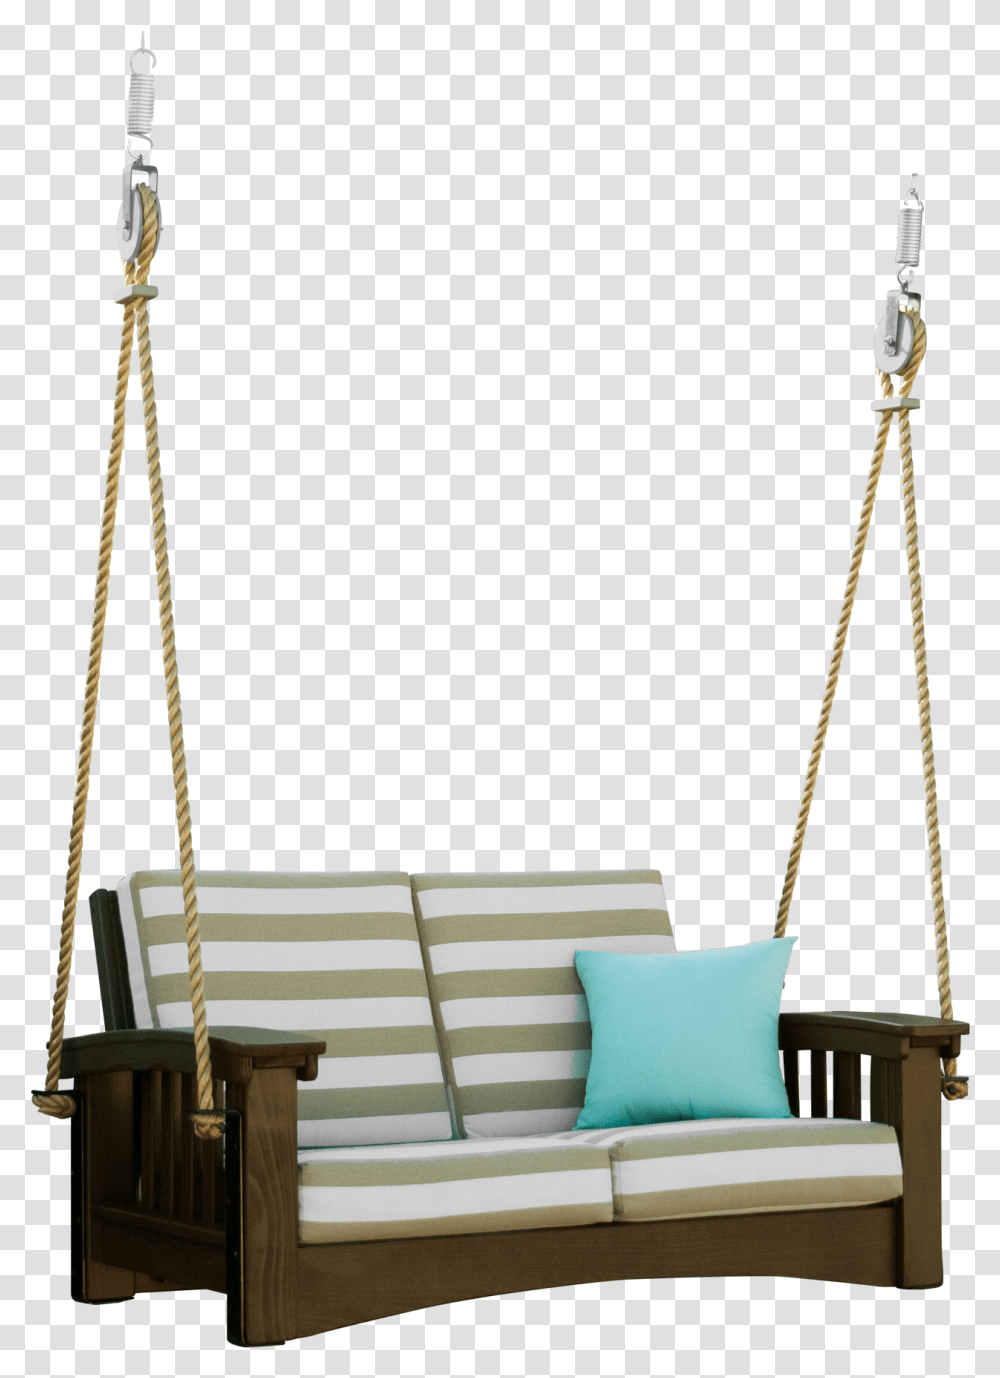 Porch Swing Pic Porch Swing, Toy, Furniture Transparent Png